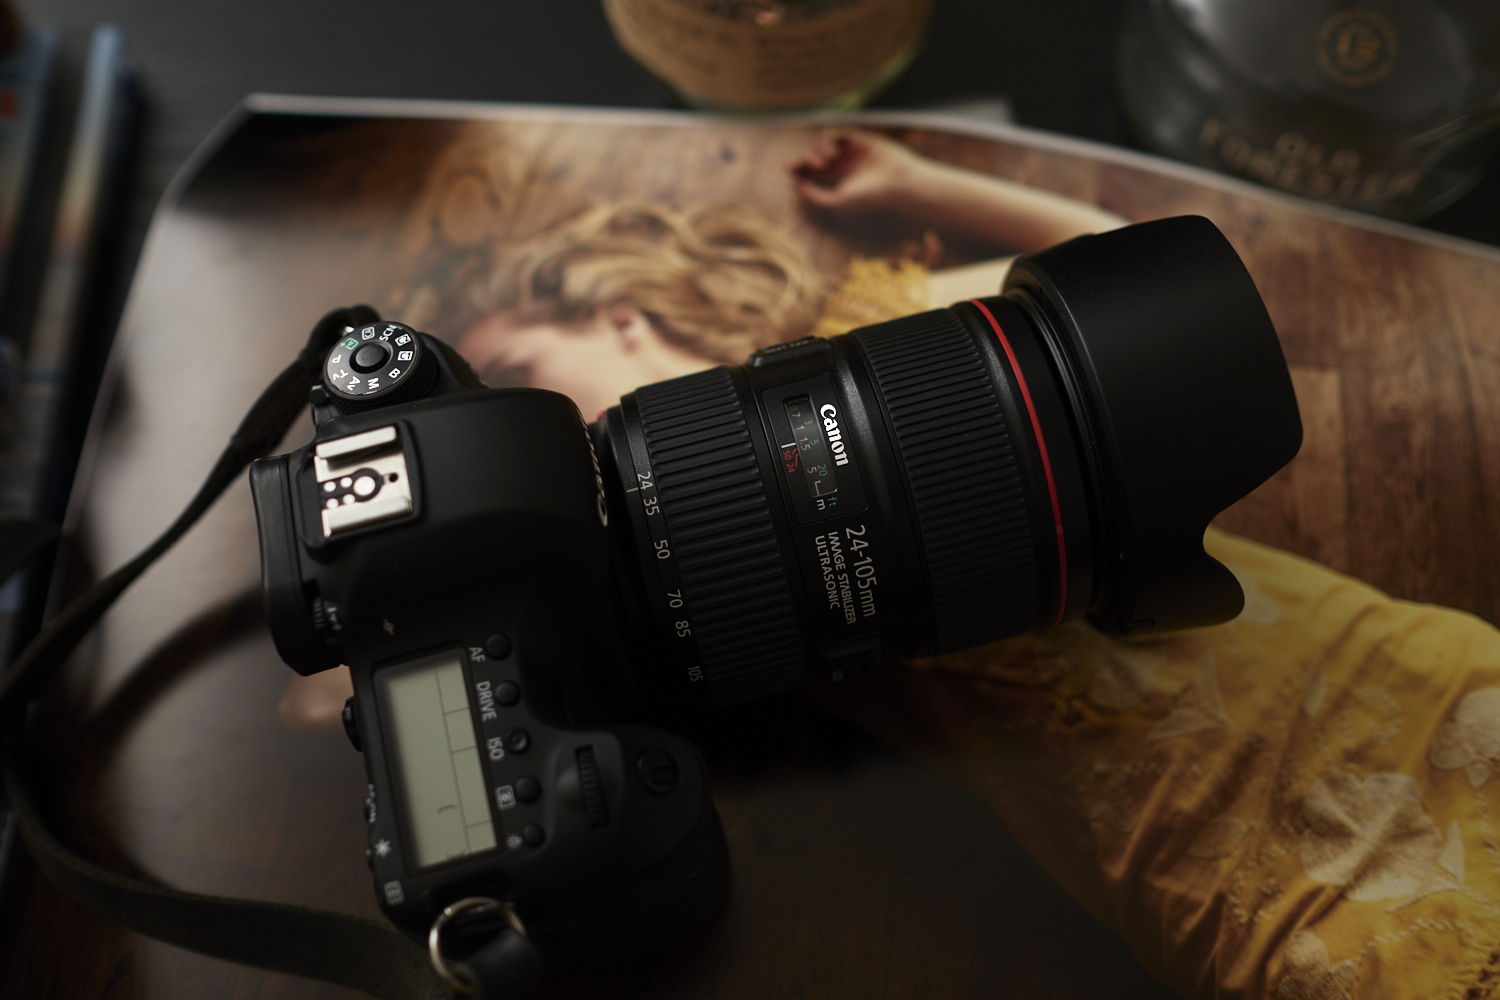 Review: Canon 24-105mm f4 L IS USM II (Canon EF Mount)